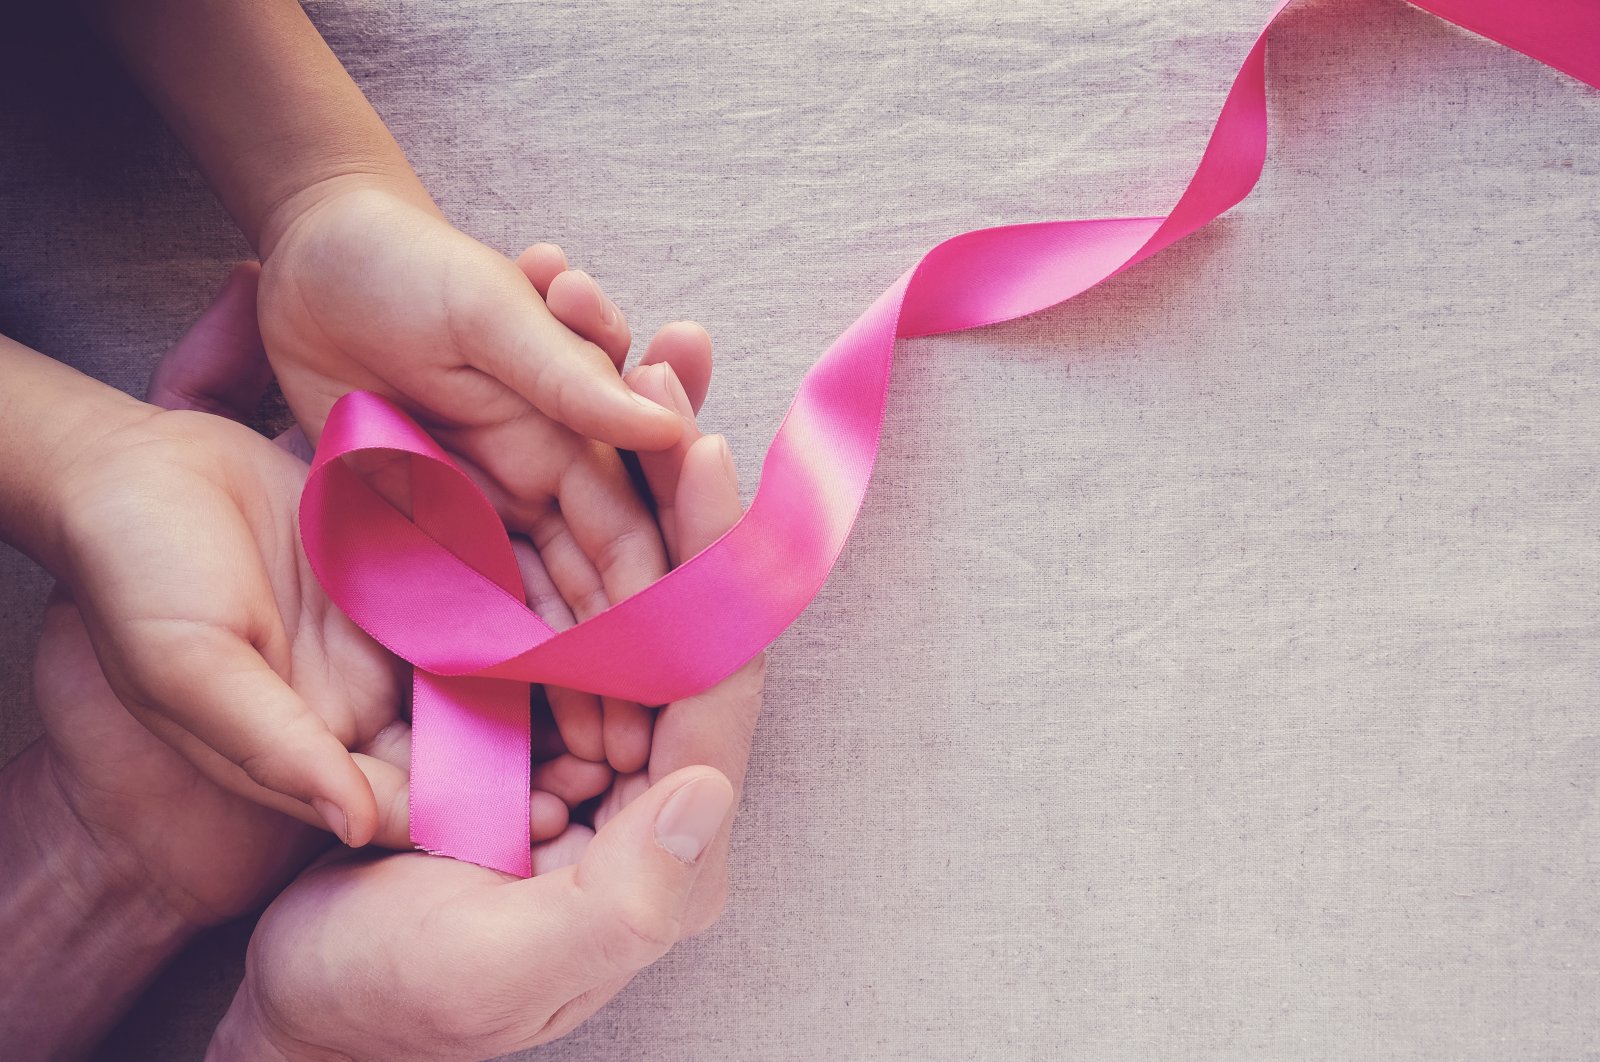 Adult and child hands are seen holding a pink ribbon symbolizing breast cancer awareness. (Shutterstock Photo)